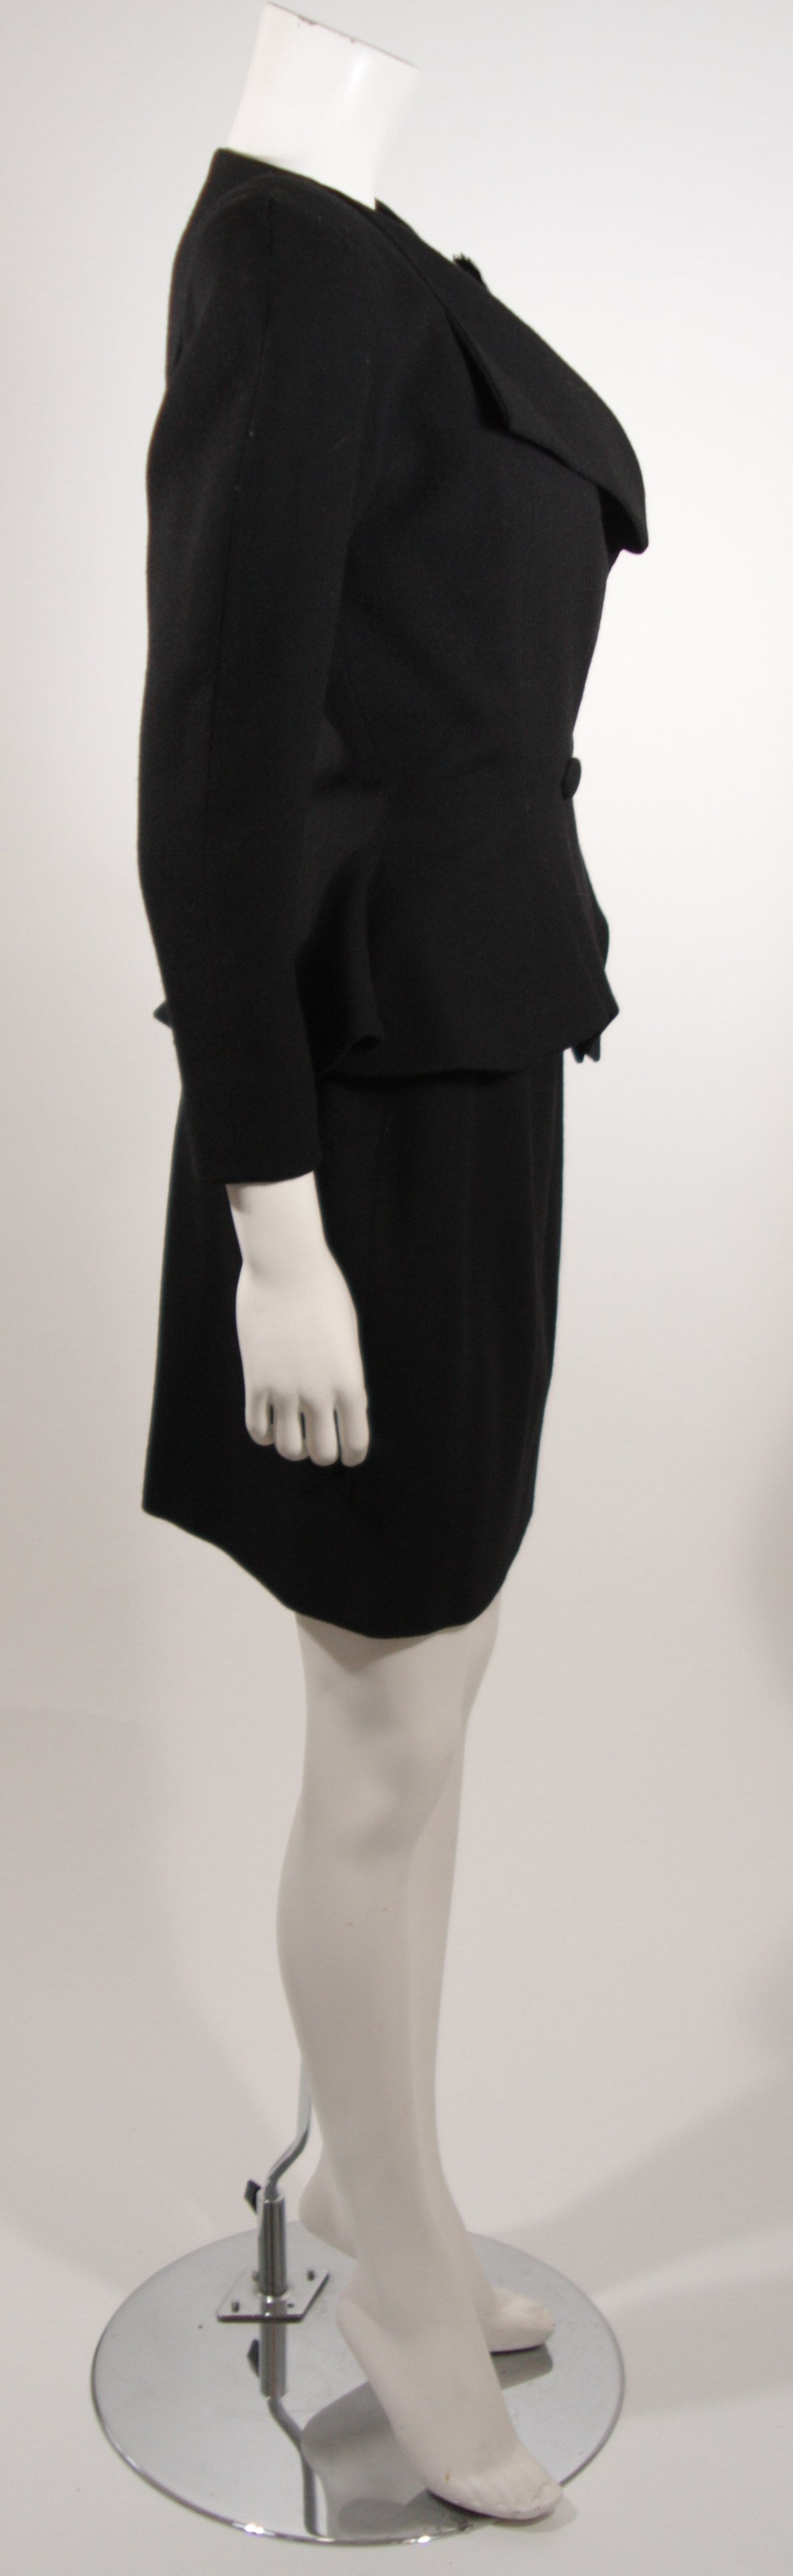 Women's Travilla Black Structured Skirt Suit Size 8 For Sale